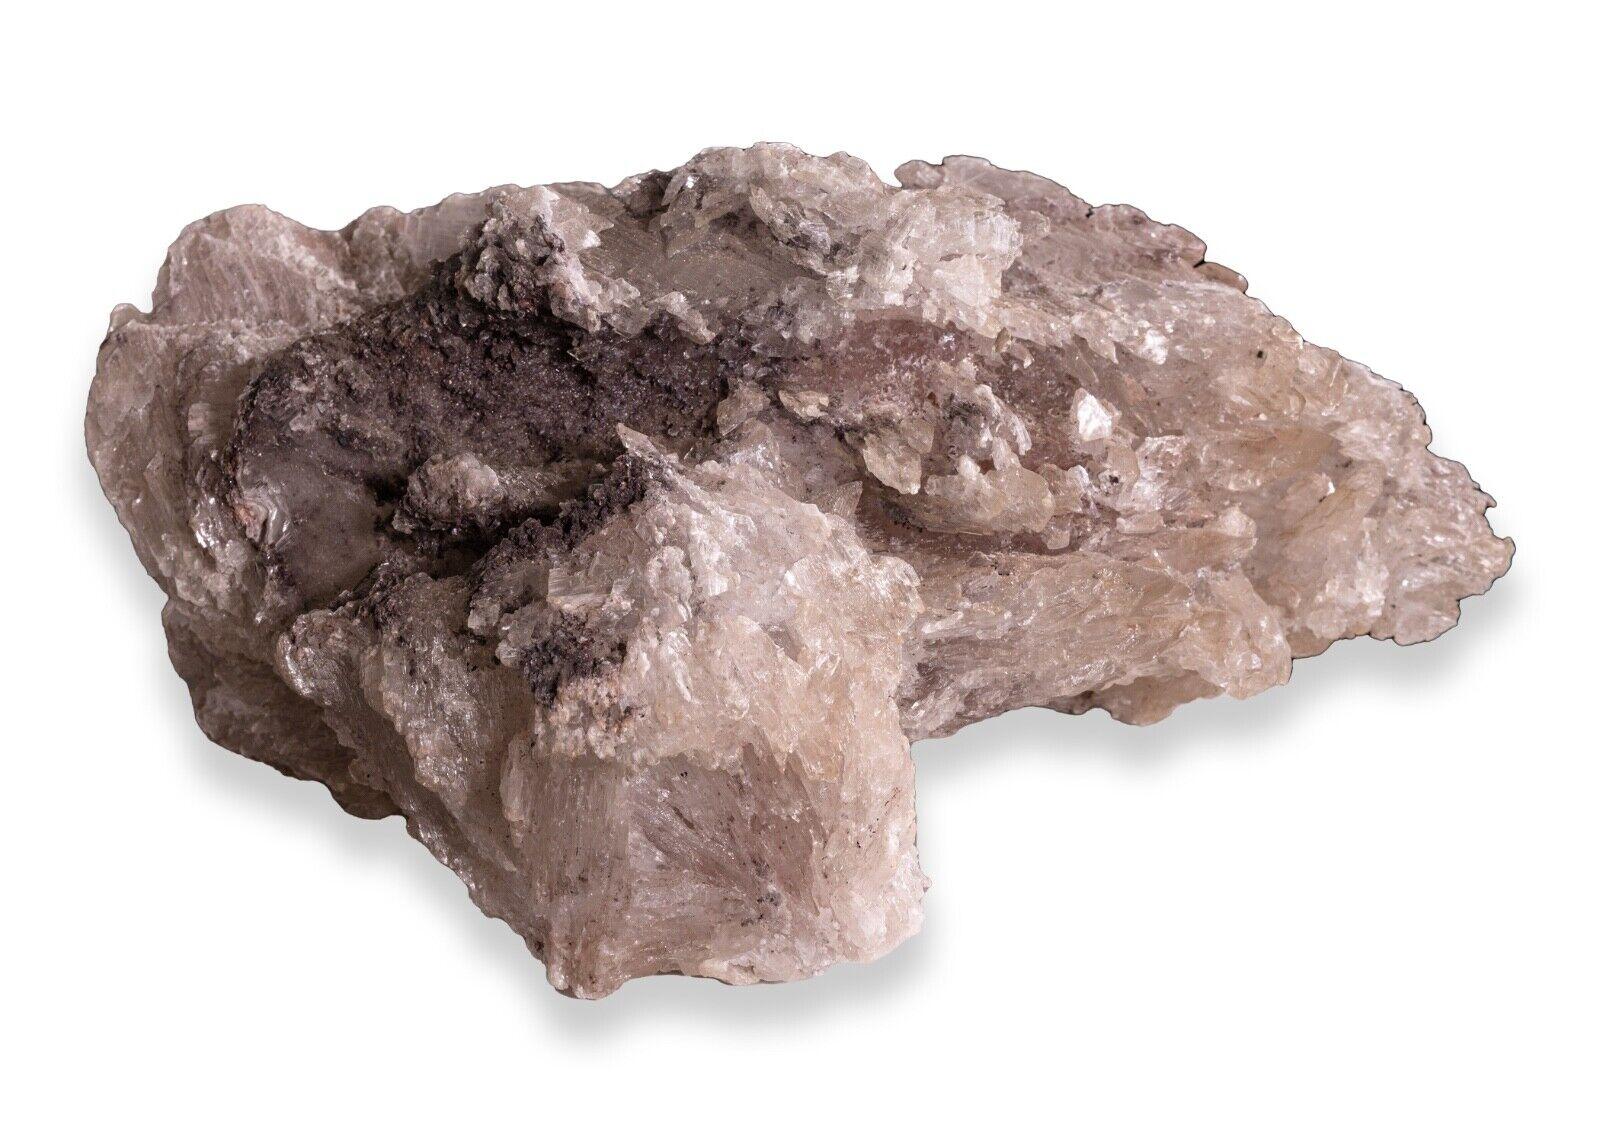 This stunning desert crystal gypsum geode is a natural wonder. It is formed when water seeps into cracks in the earth and evaporates, leaving behind a deposit of gypsum crystals. Desert crystal gypsum geodes are a popular choice for collectors and